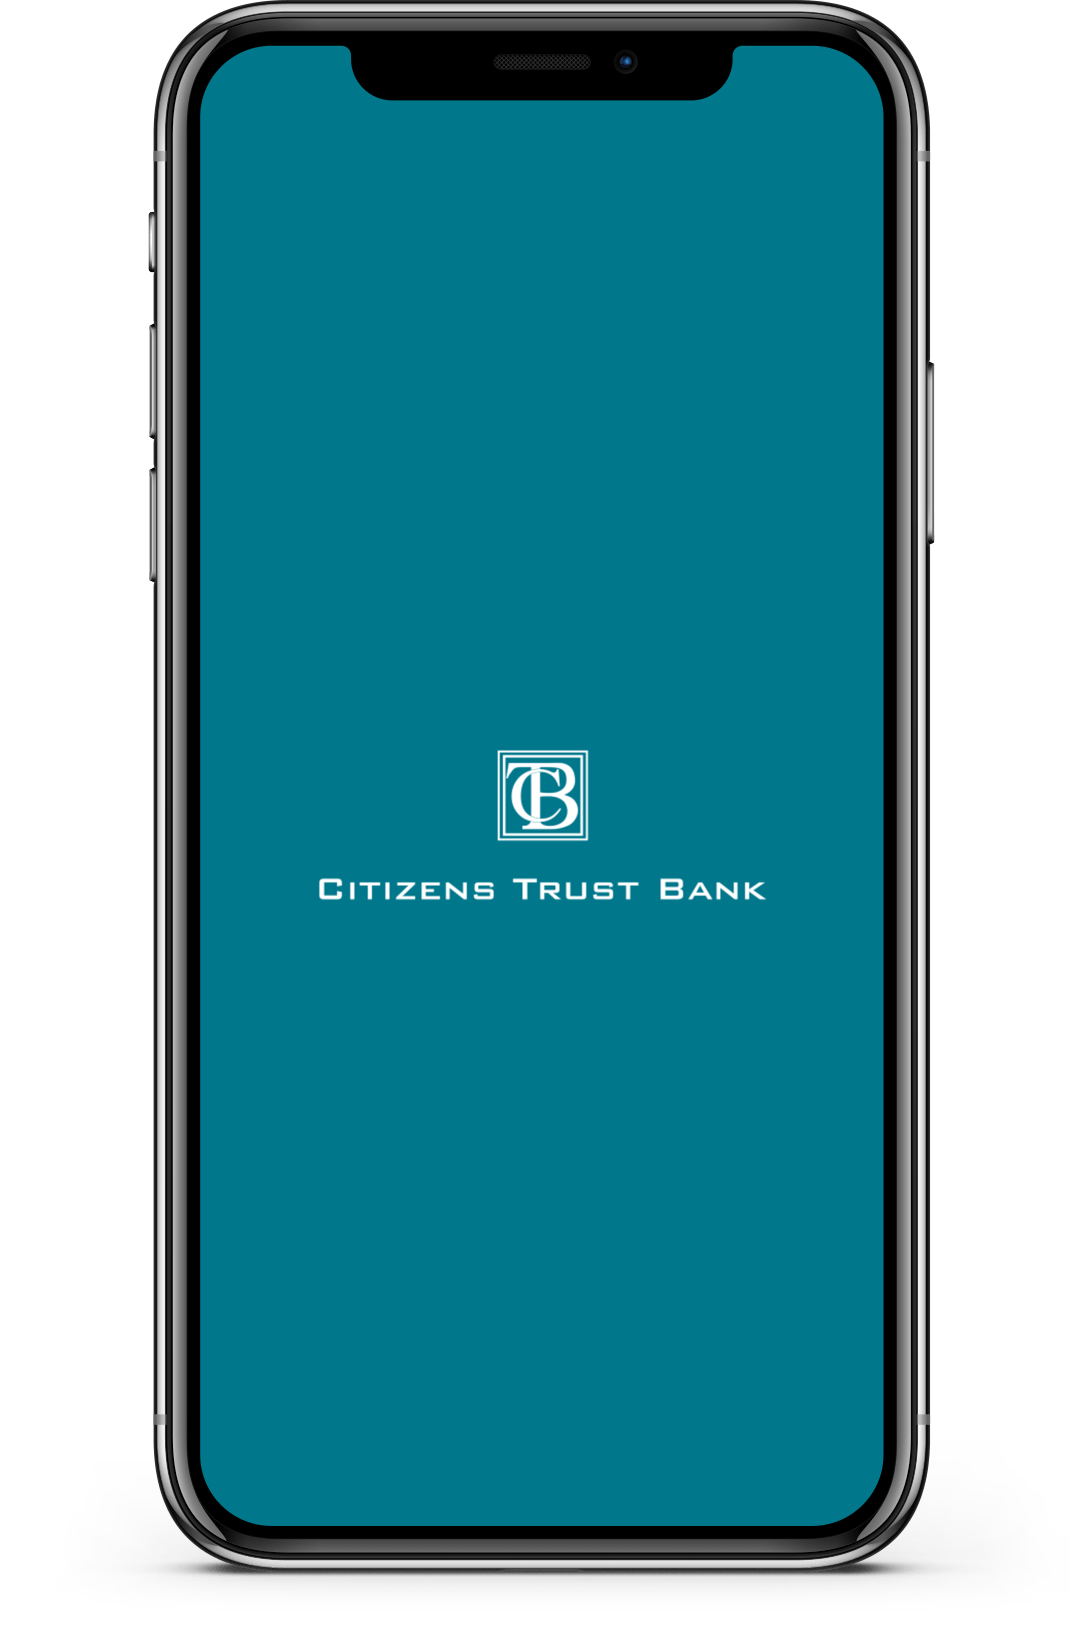 mobile banking images